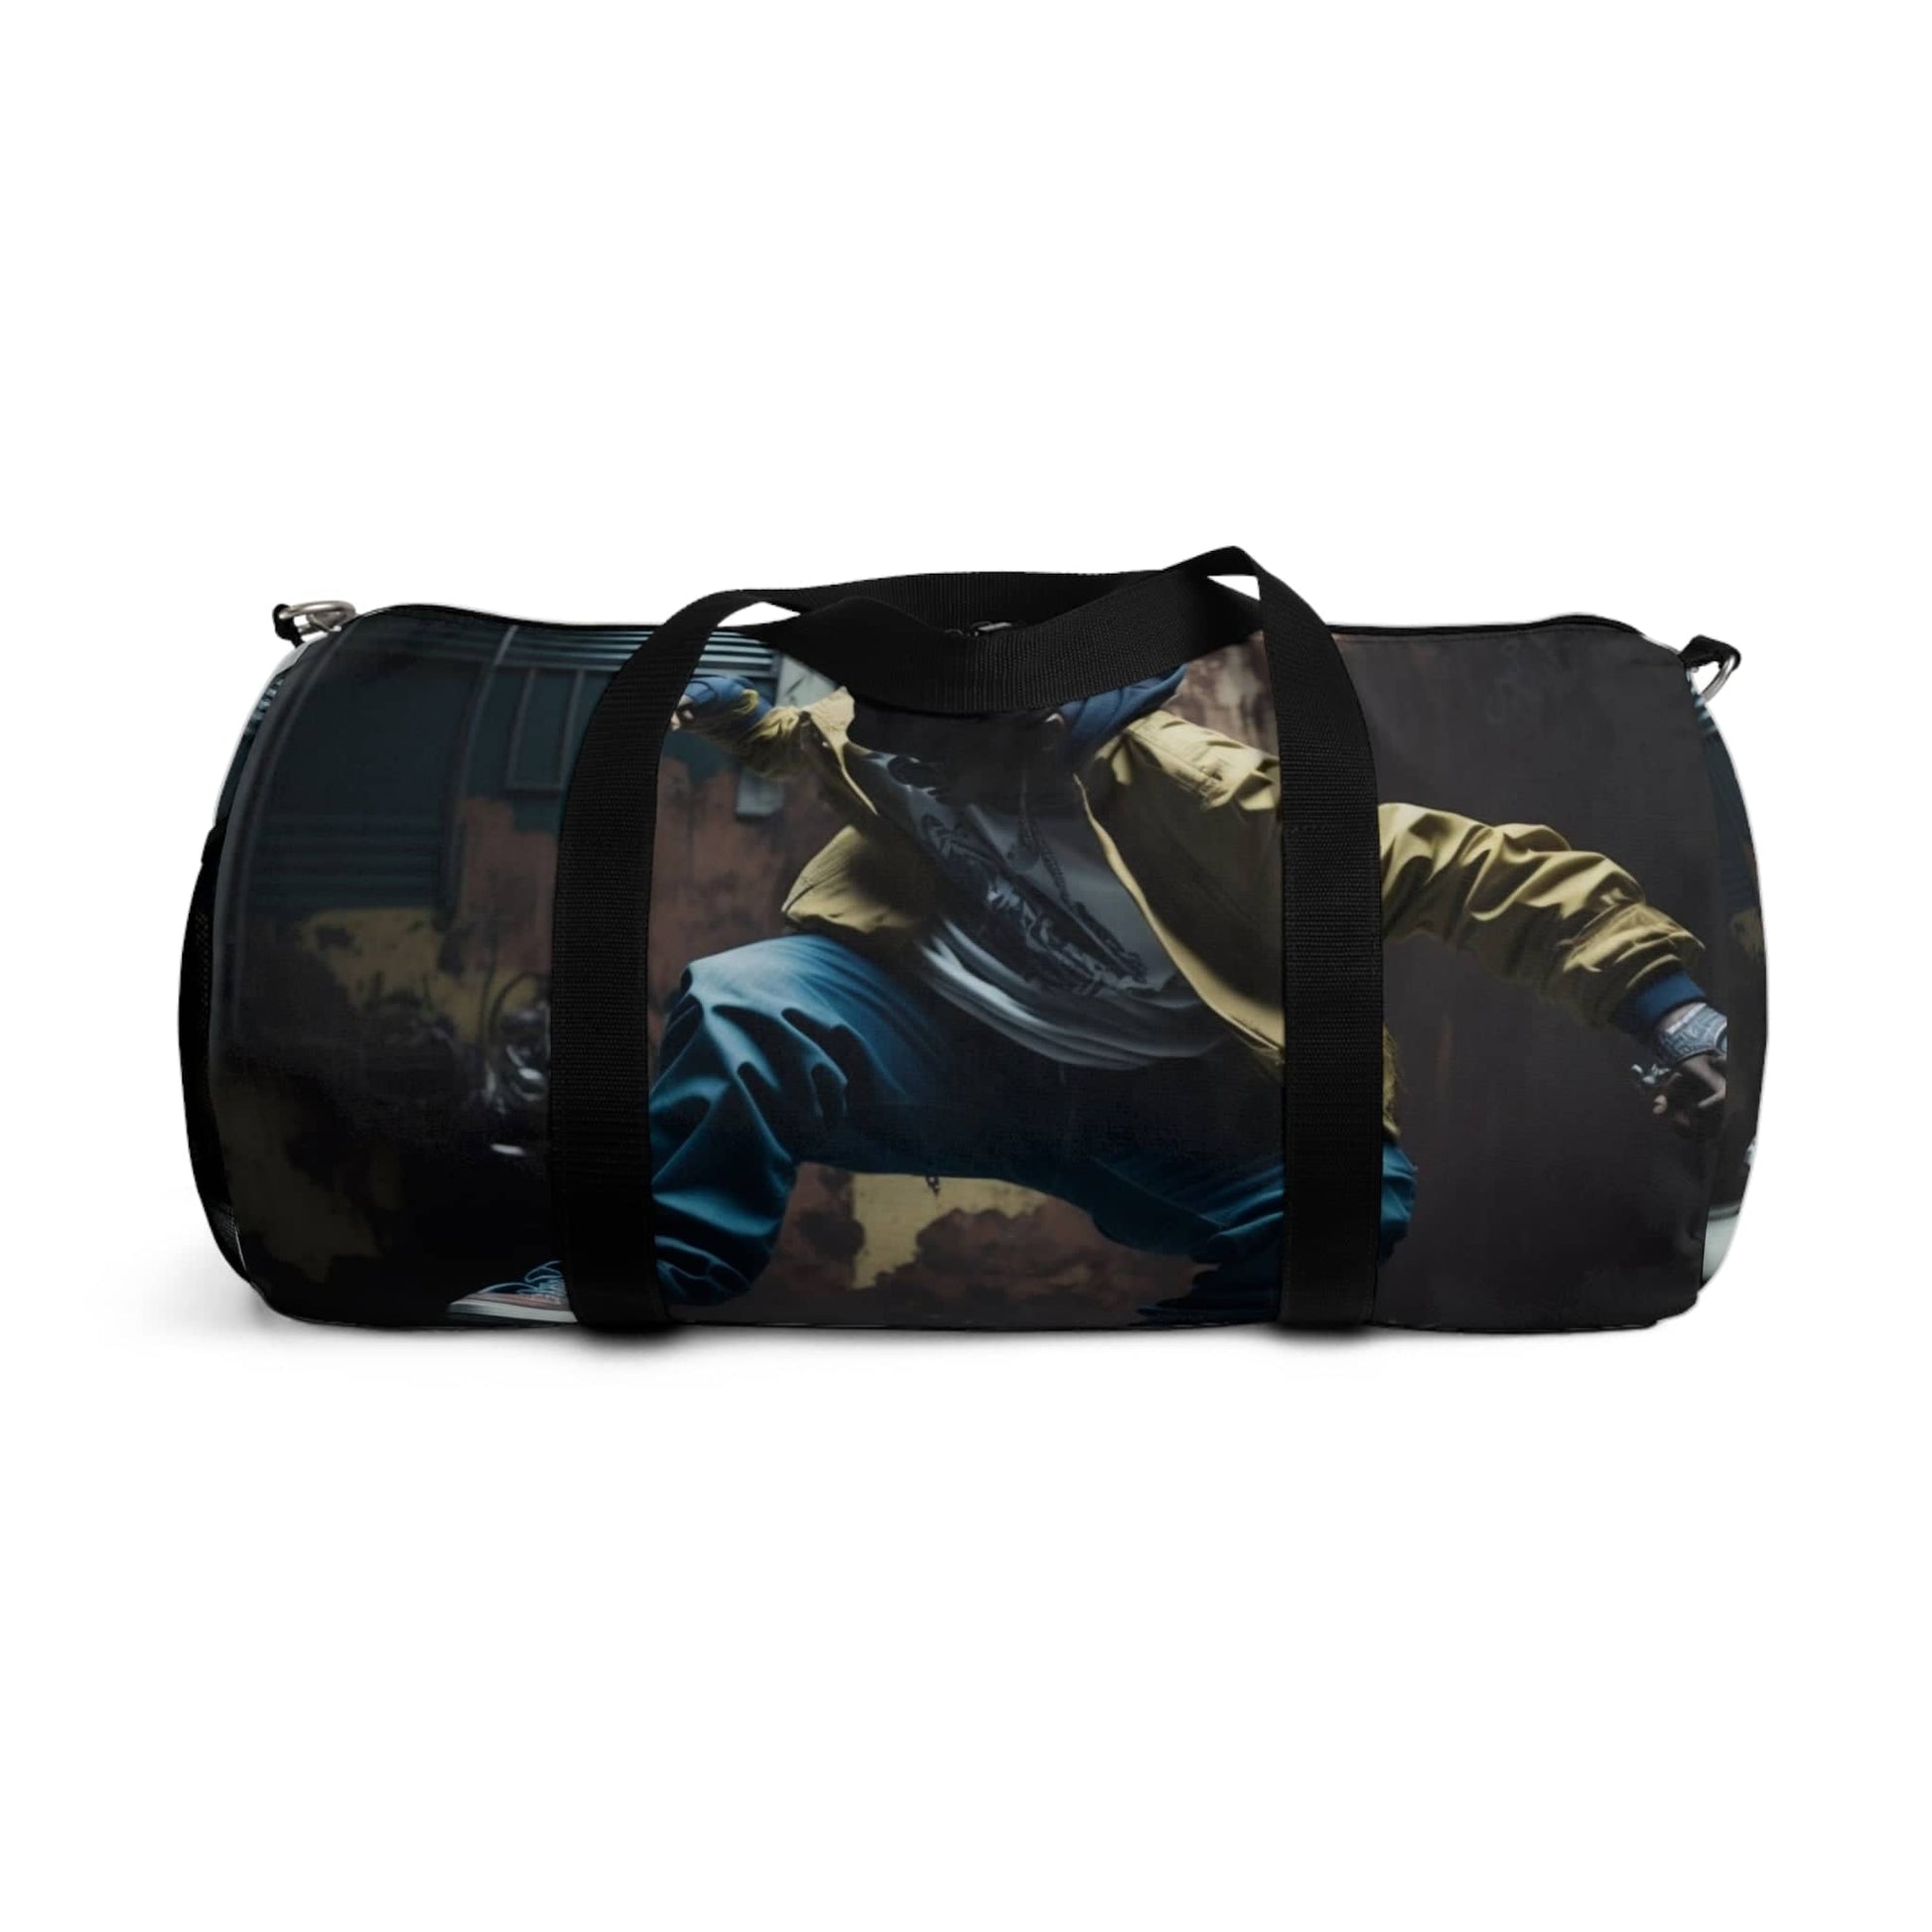 "SkateHop: The Ultimate Hip-Hop Skateboarder's Duffle Bag for Urban Style Enthusiasts - Your Perfect Companion for Streetwear Fashion and Skateboarding Adventures" Bags Bigger Than Life   